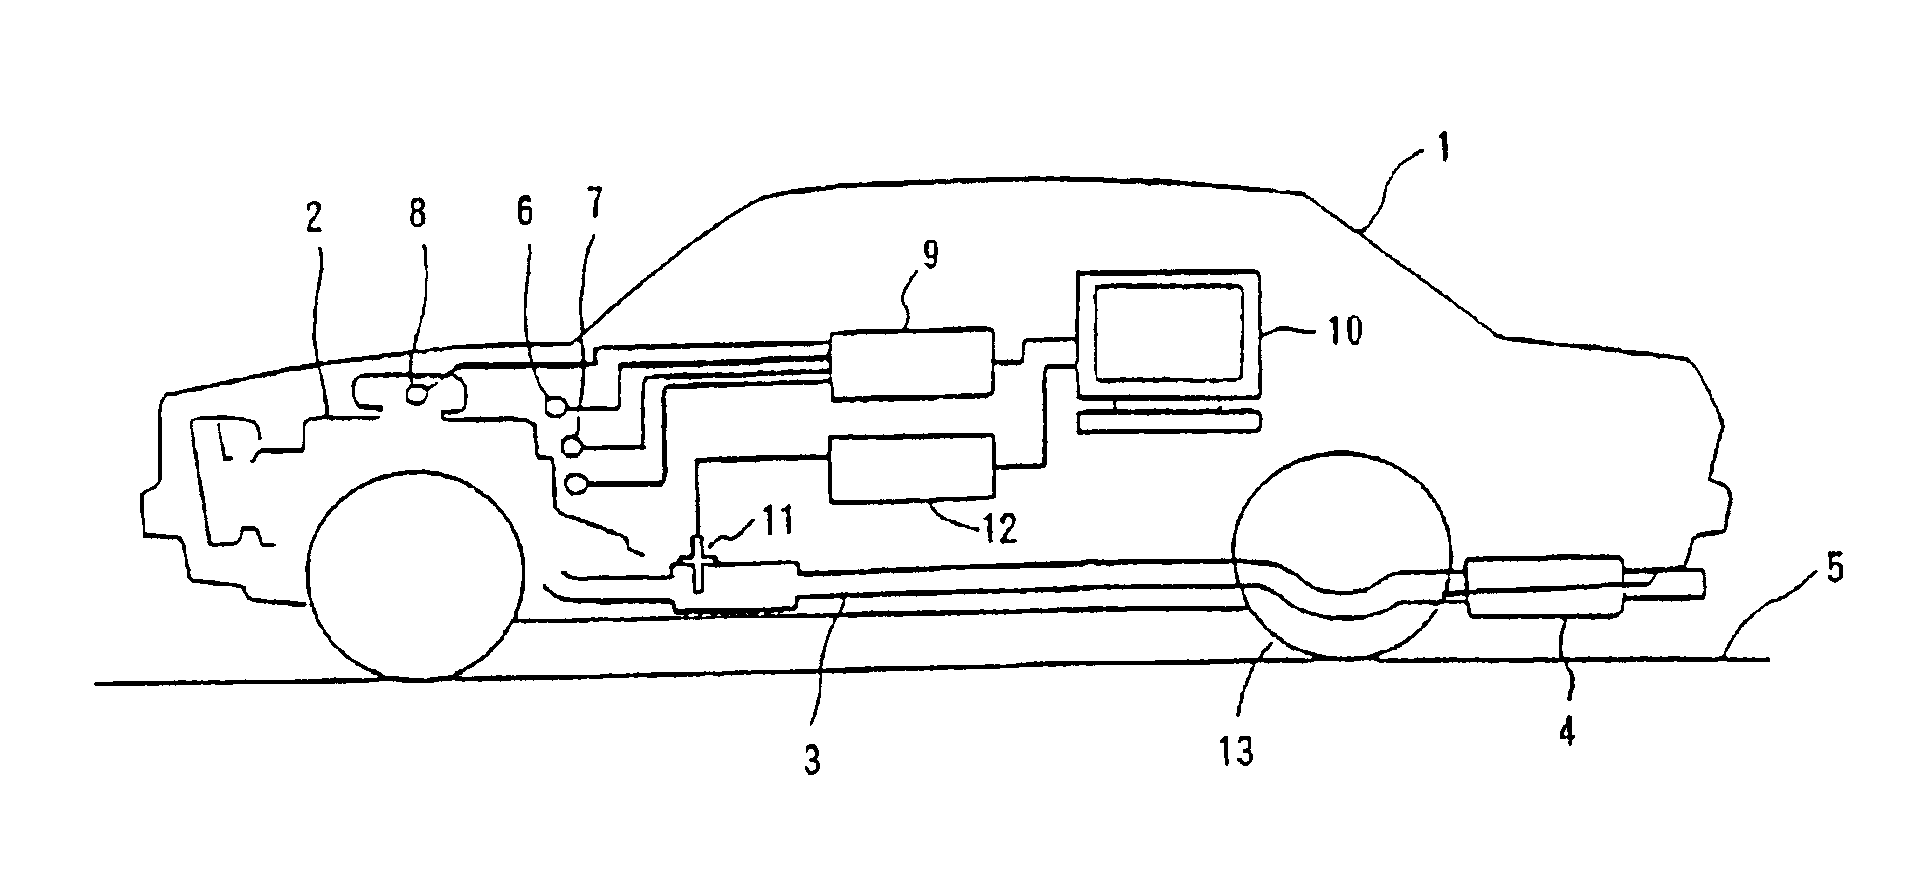 System and method for measuring brake mean effective pressure in a running vehicle